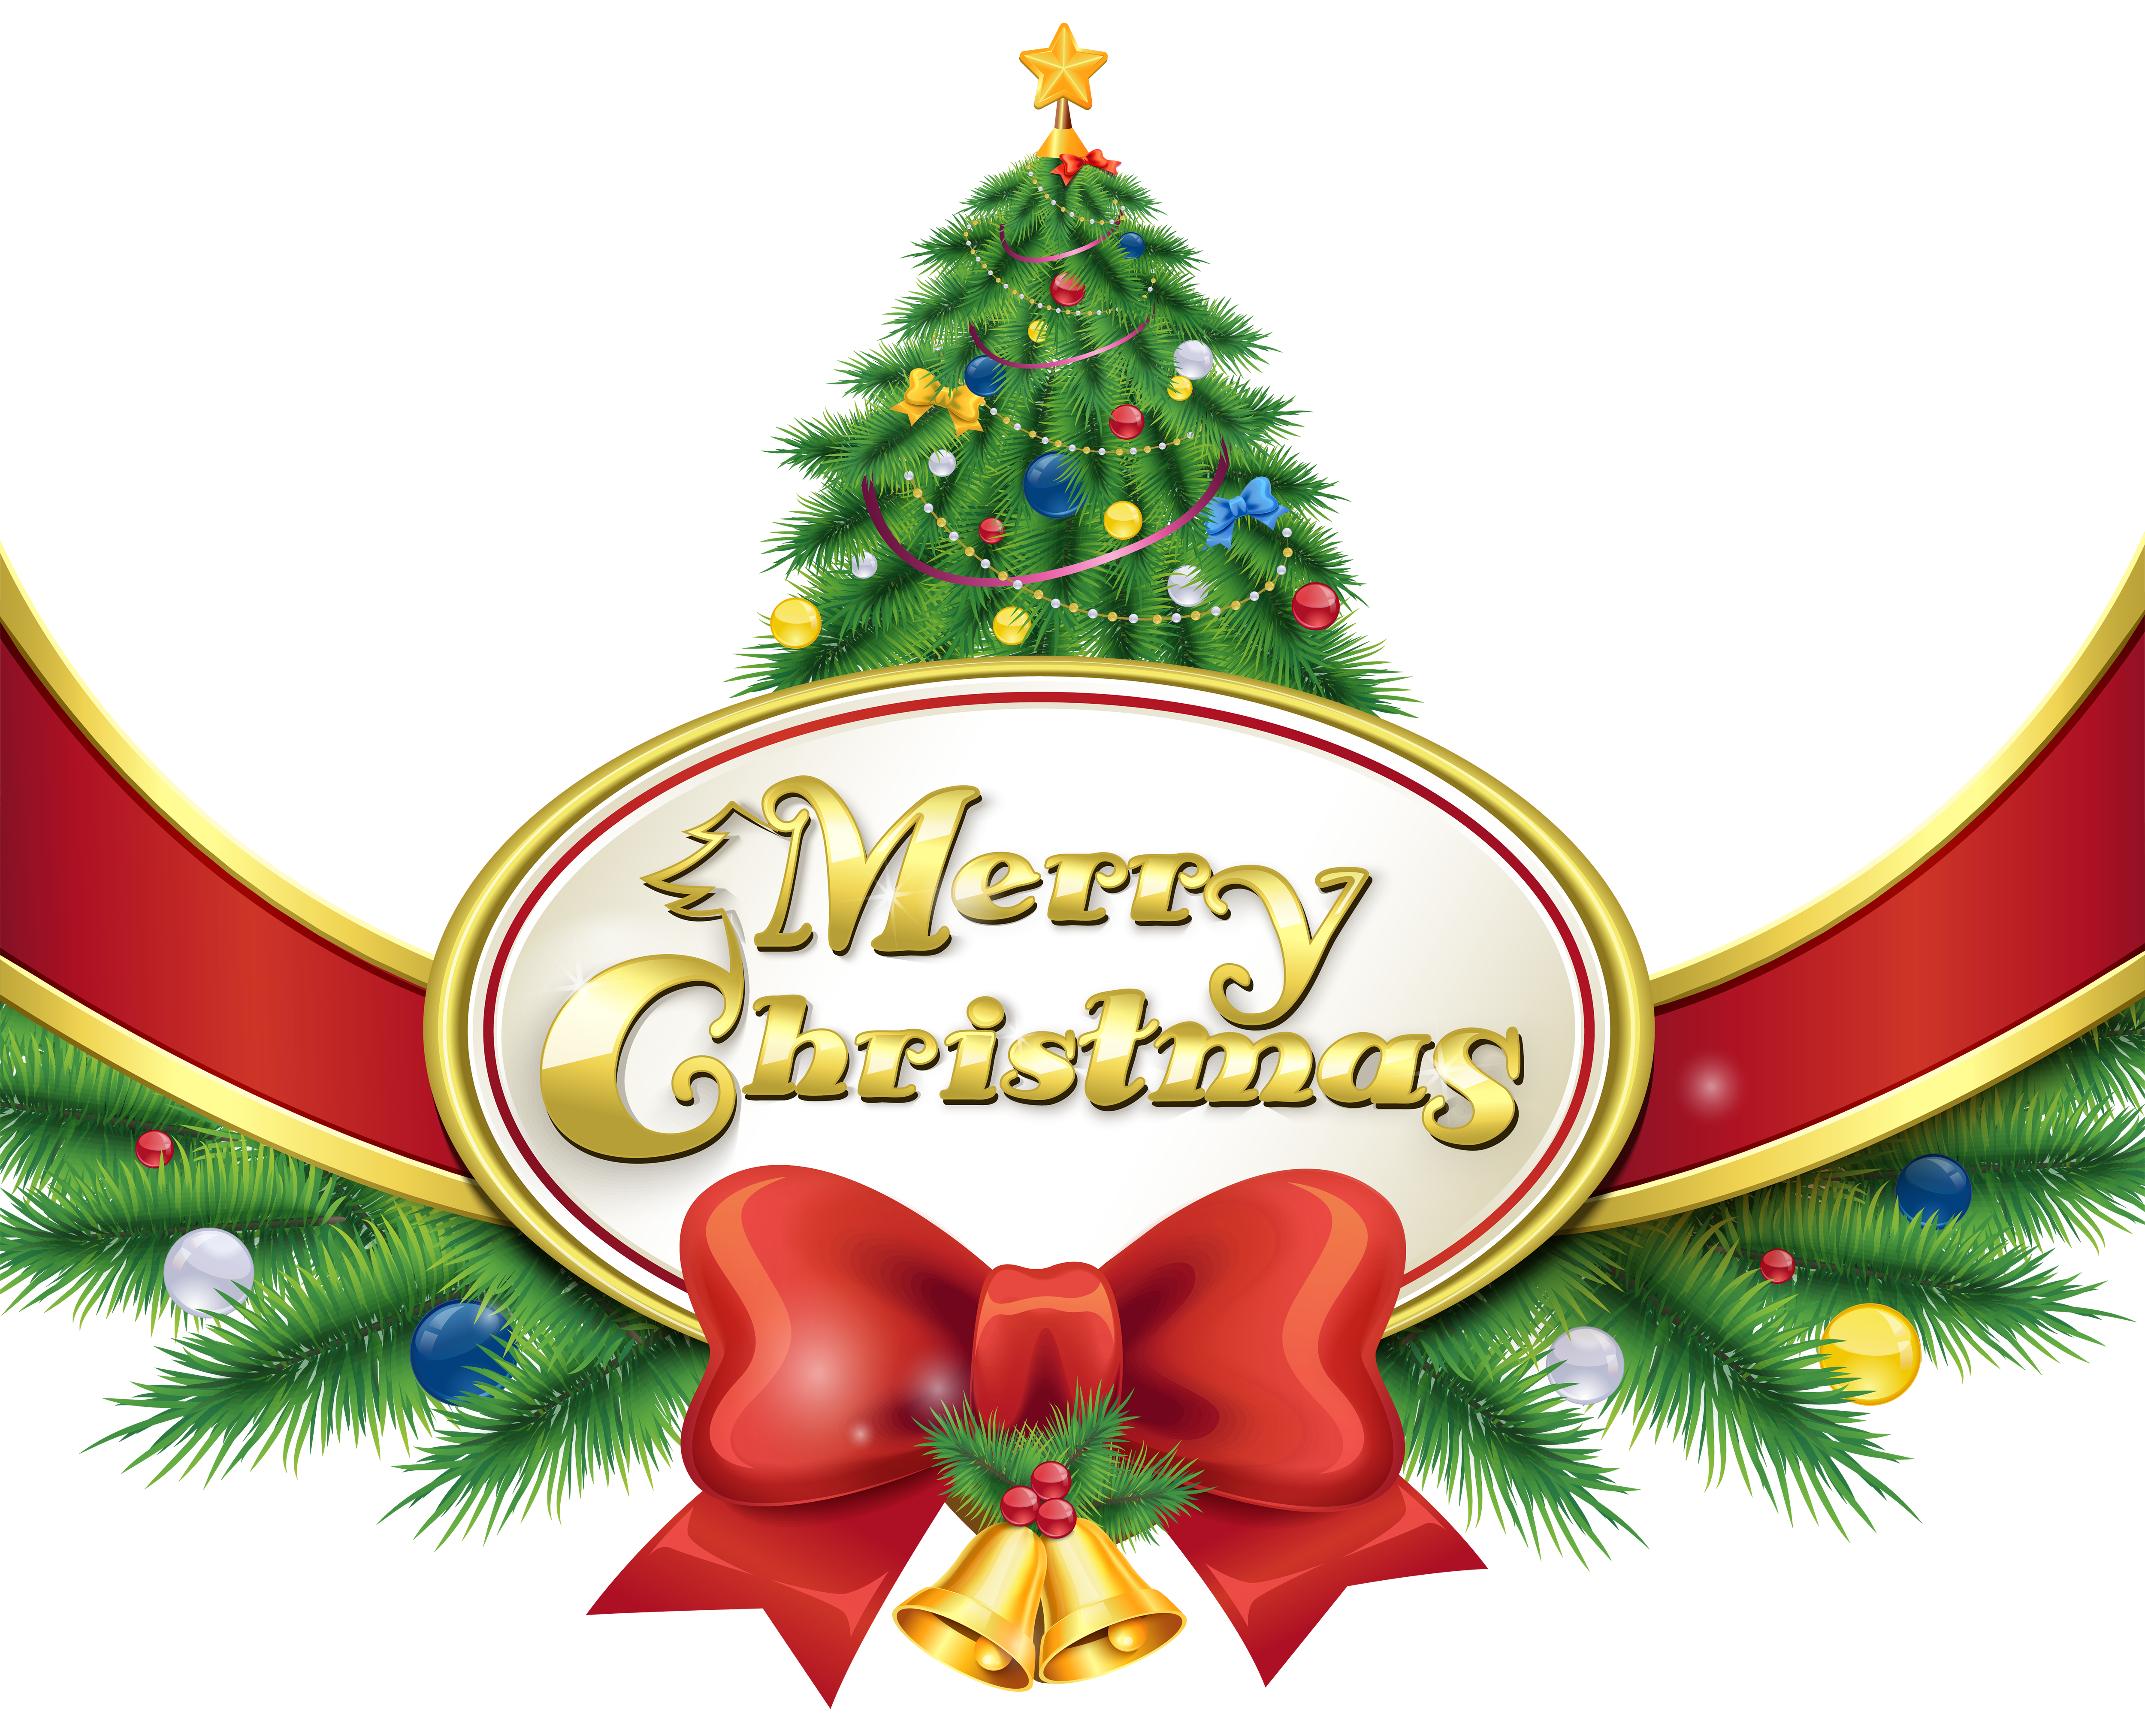 Merry Christmas with Tree and Bow PNG Clipart Image.